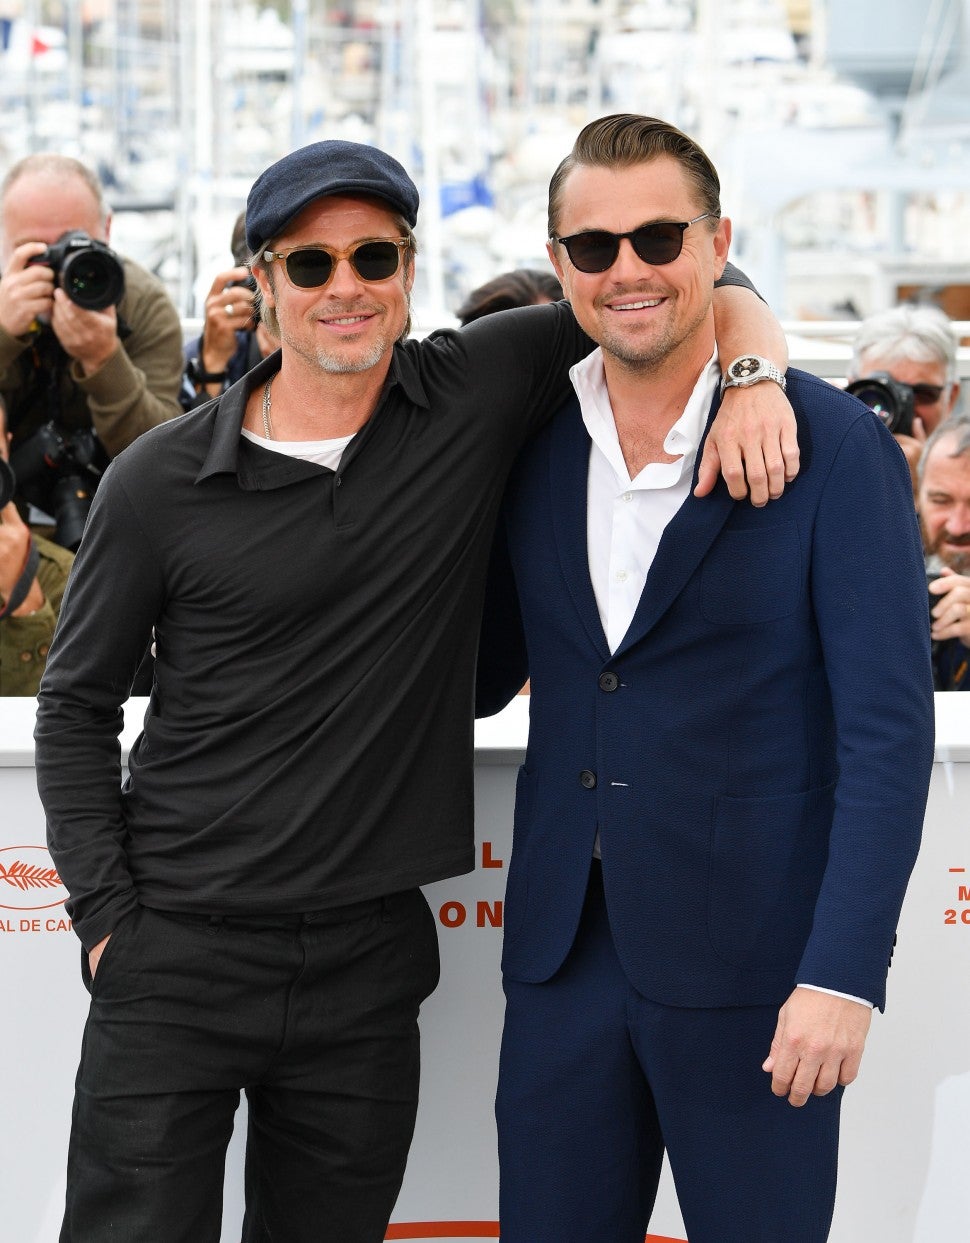 Brad Pitt and Leonardo DiCaprio attend the photocall for "Once Upon A Time In Hollywood" during the 72nd annual Cannes Film Festival on May 22, 2019 in Cannes, France.